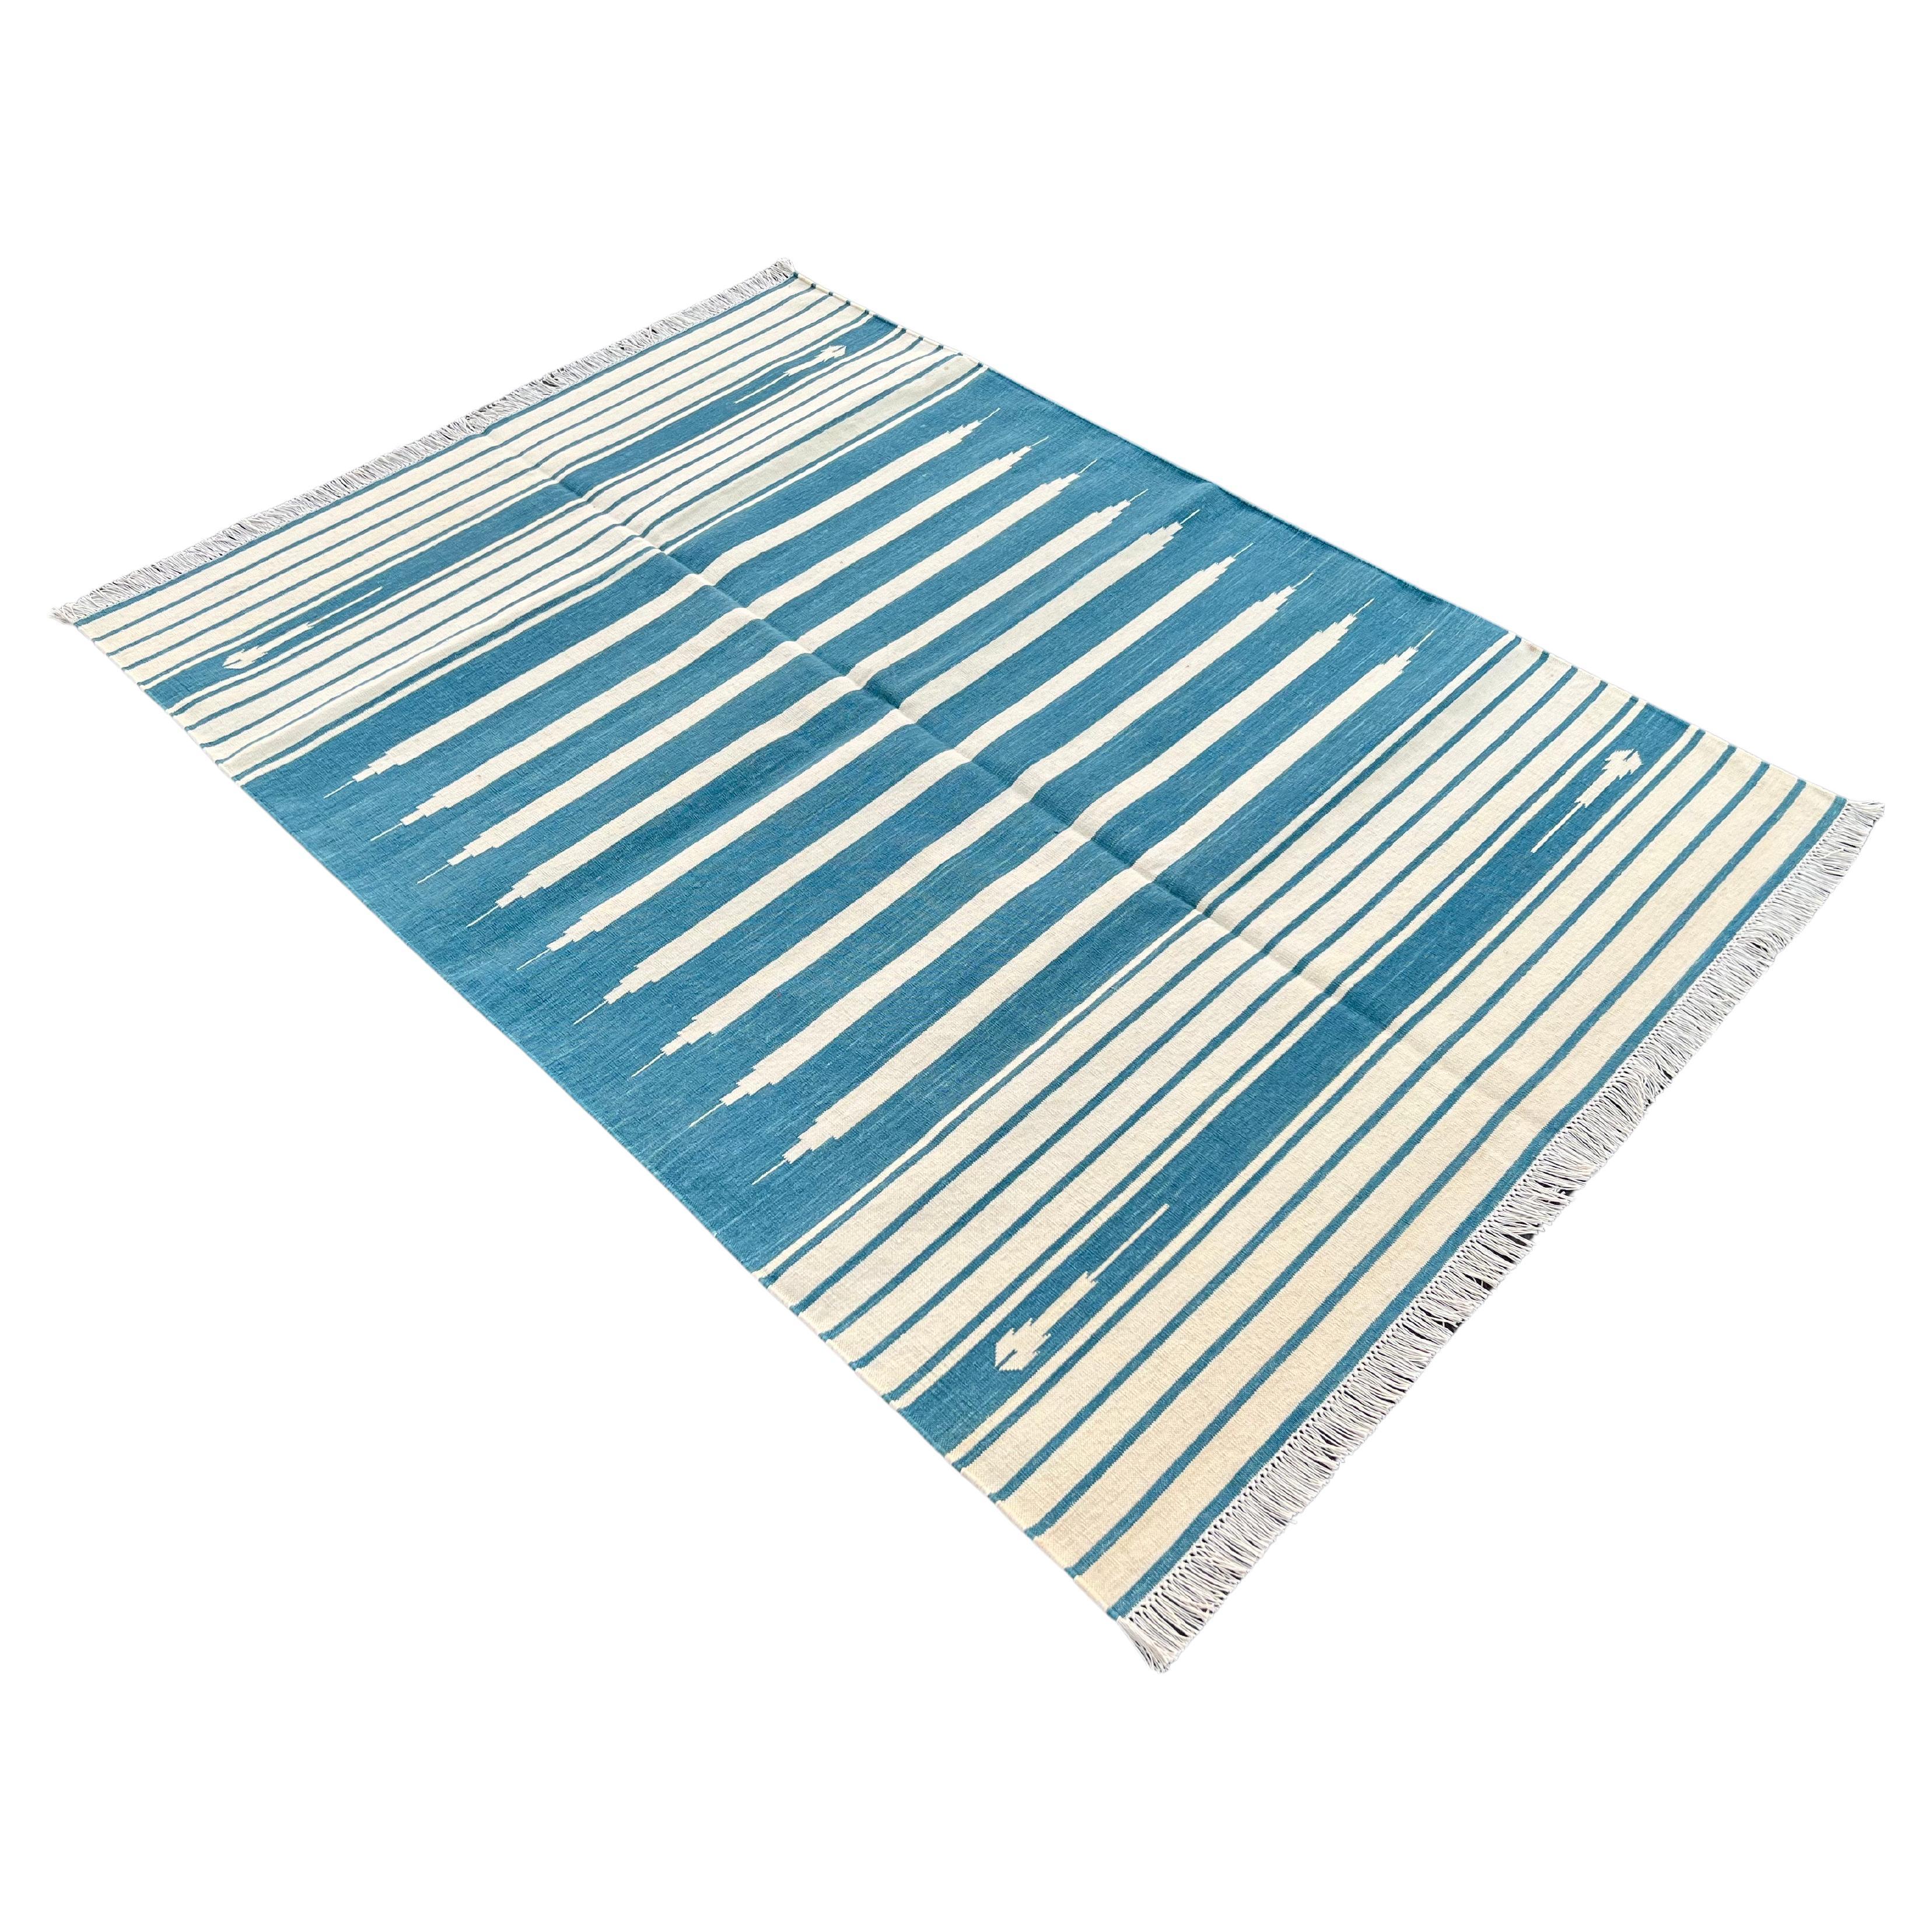 Handmade Cotton Area Flat Weave Rug, 4x6 Cream And Blue Striped Indian Dhurrie